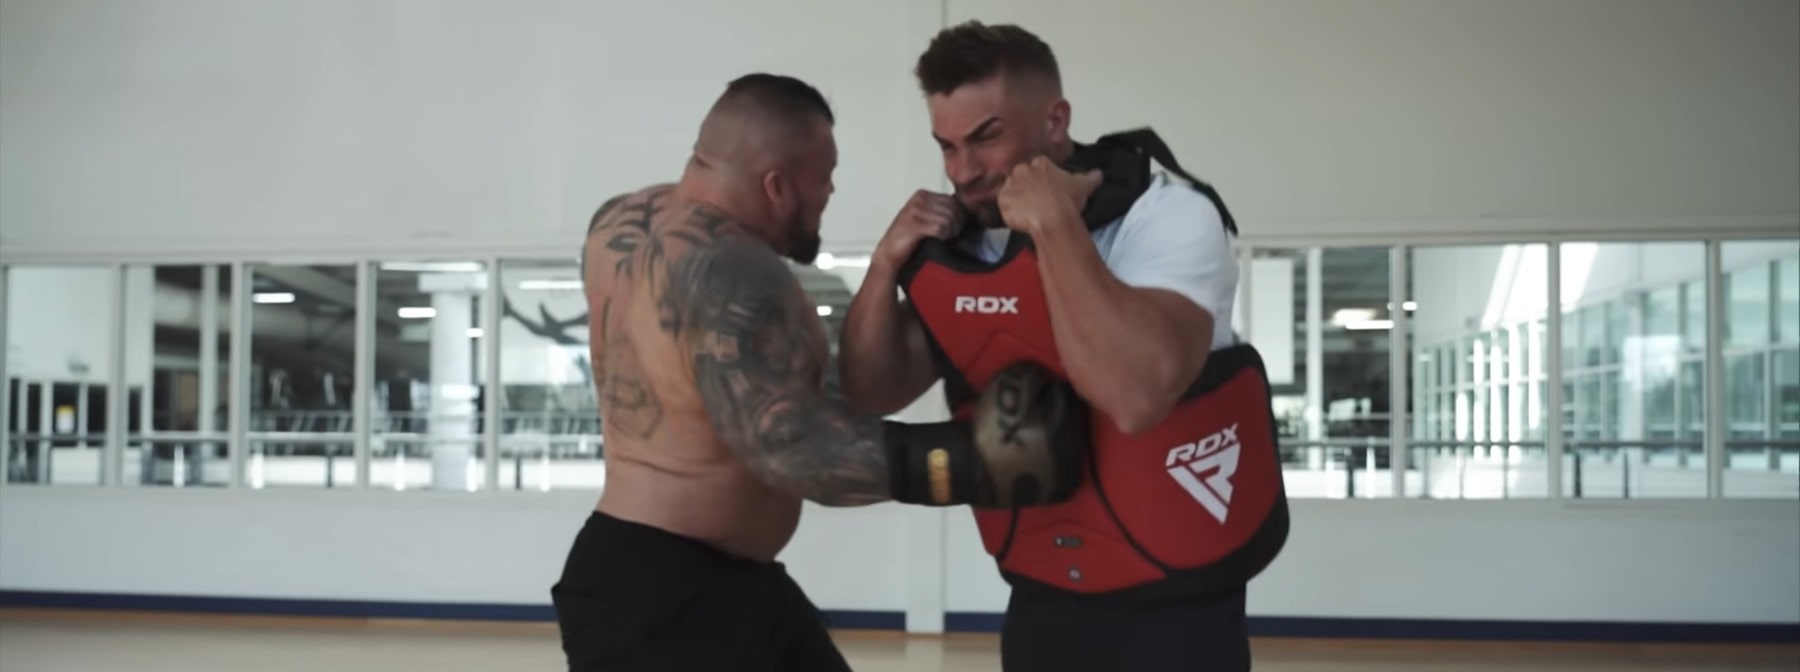 Eddie Hall Punches Ryan Terry With ‘100% Force’